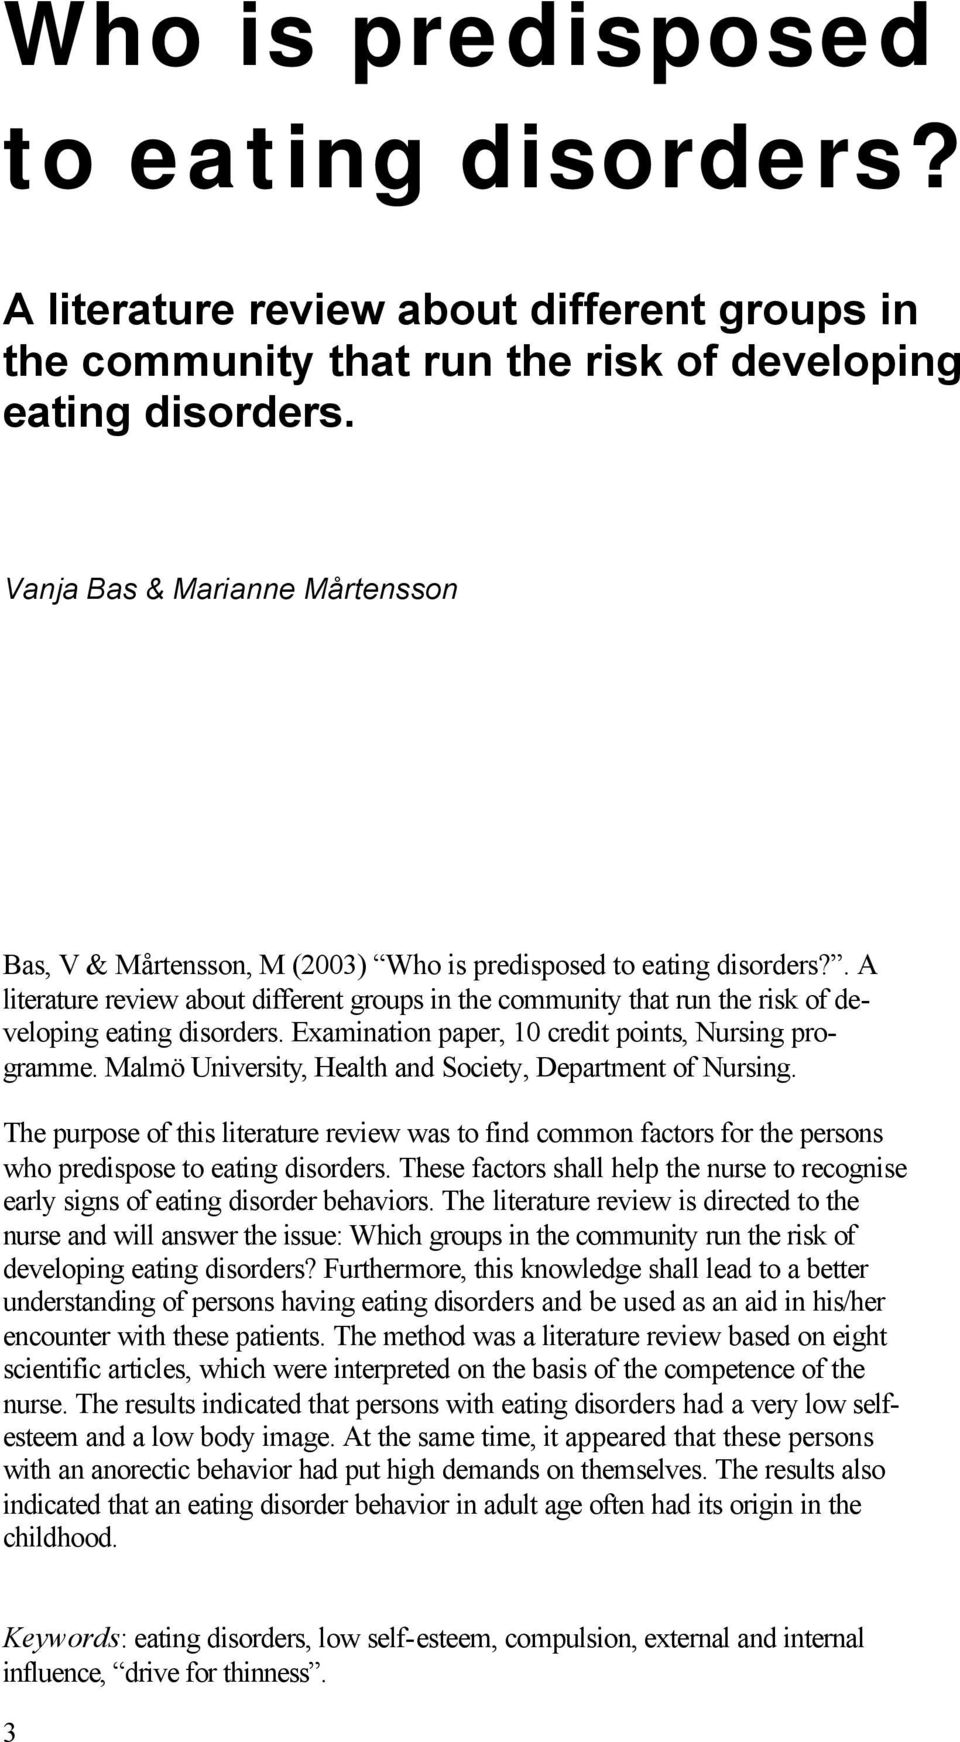 . A literature review about different groups in the community that run the risk of developing eating disorders. Examination paper, 1 credit points, Nursing programme.